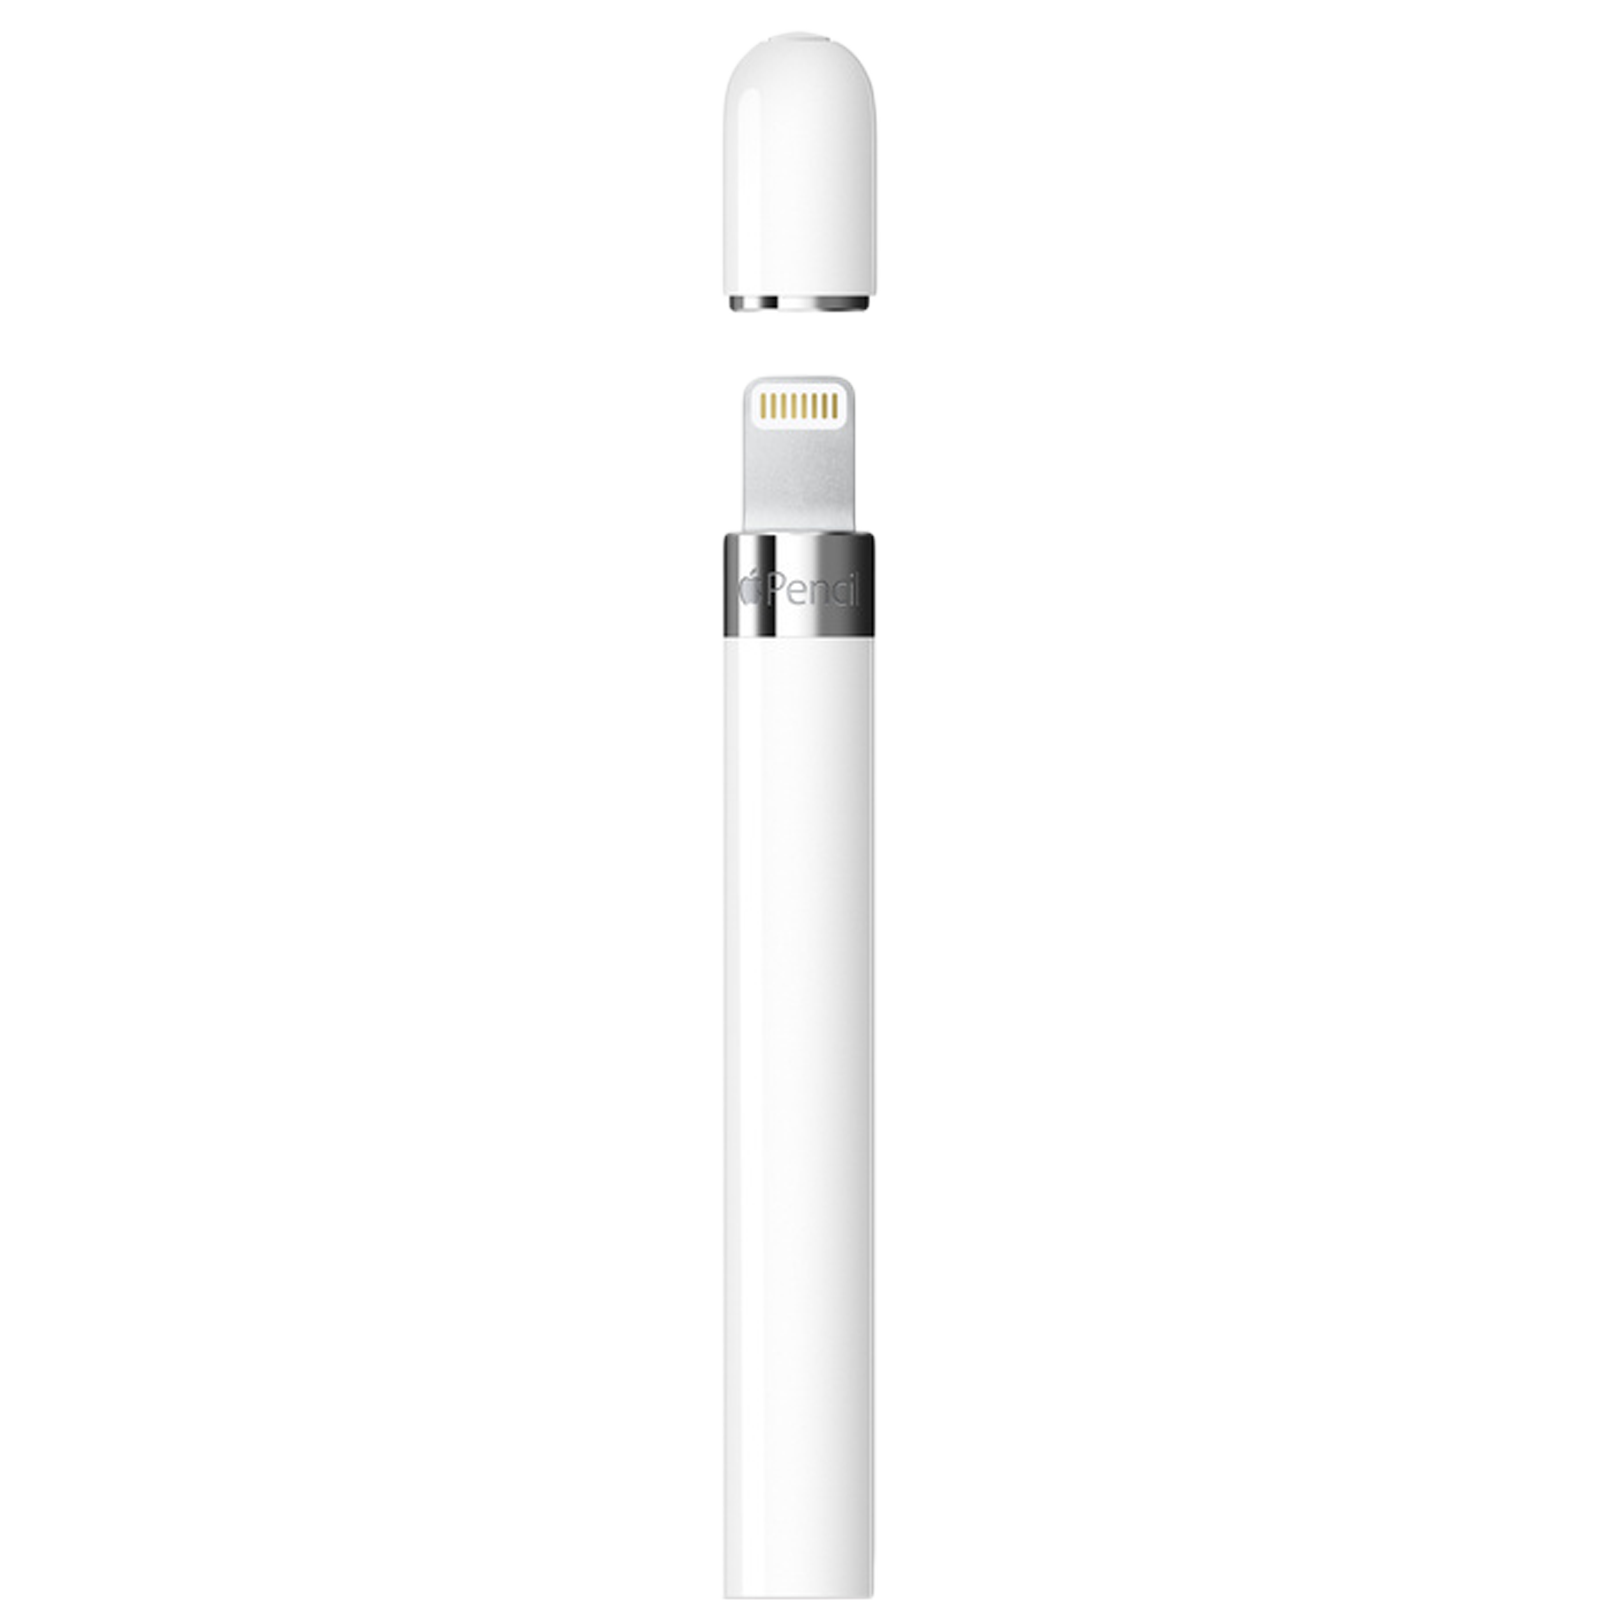 Apple Pencil Stylus (2nd Generation) - White for sale online